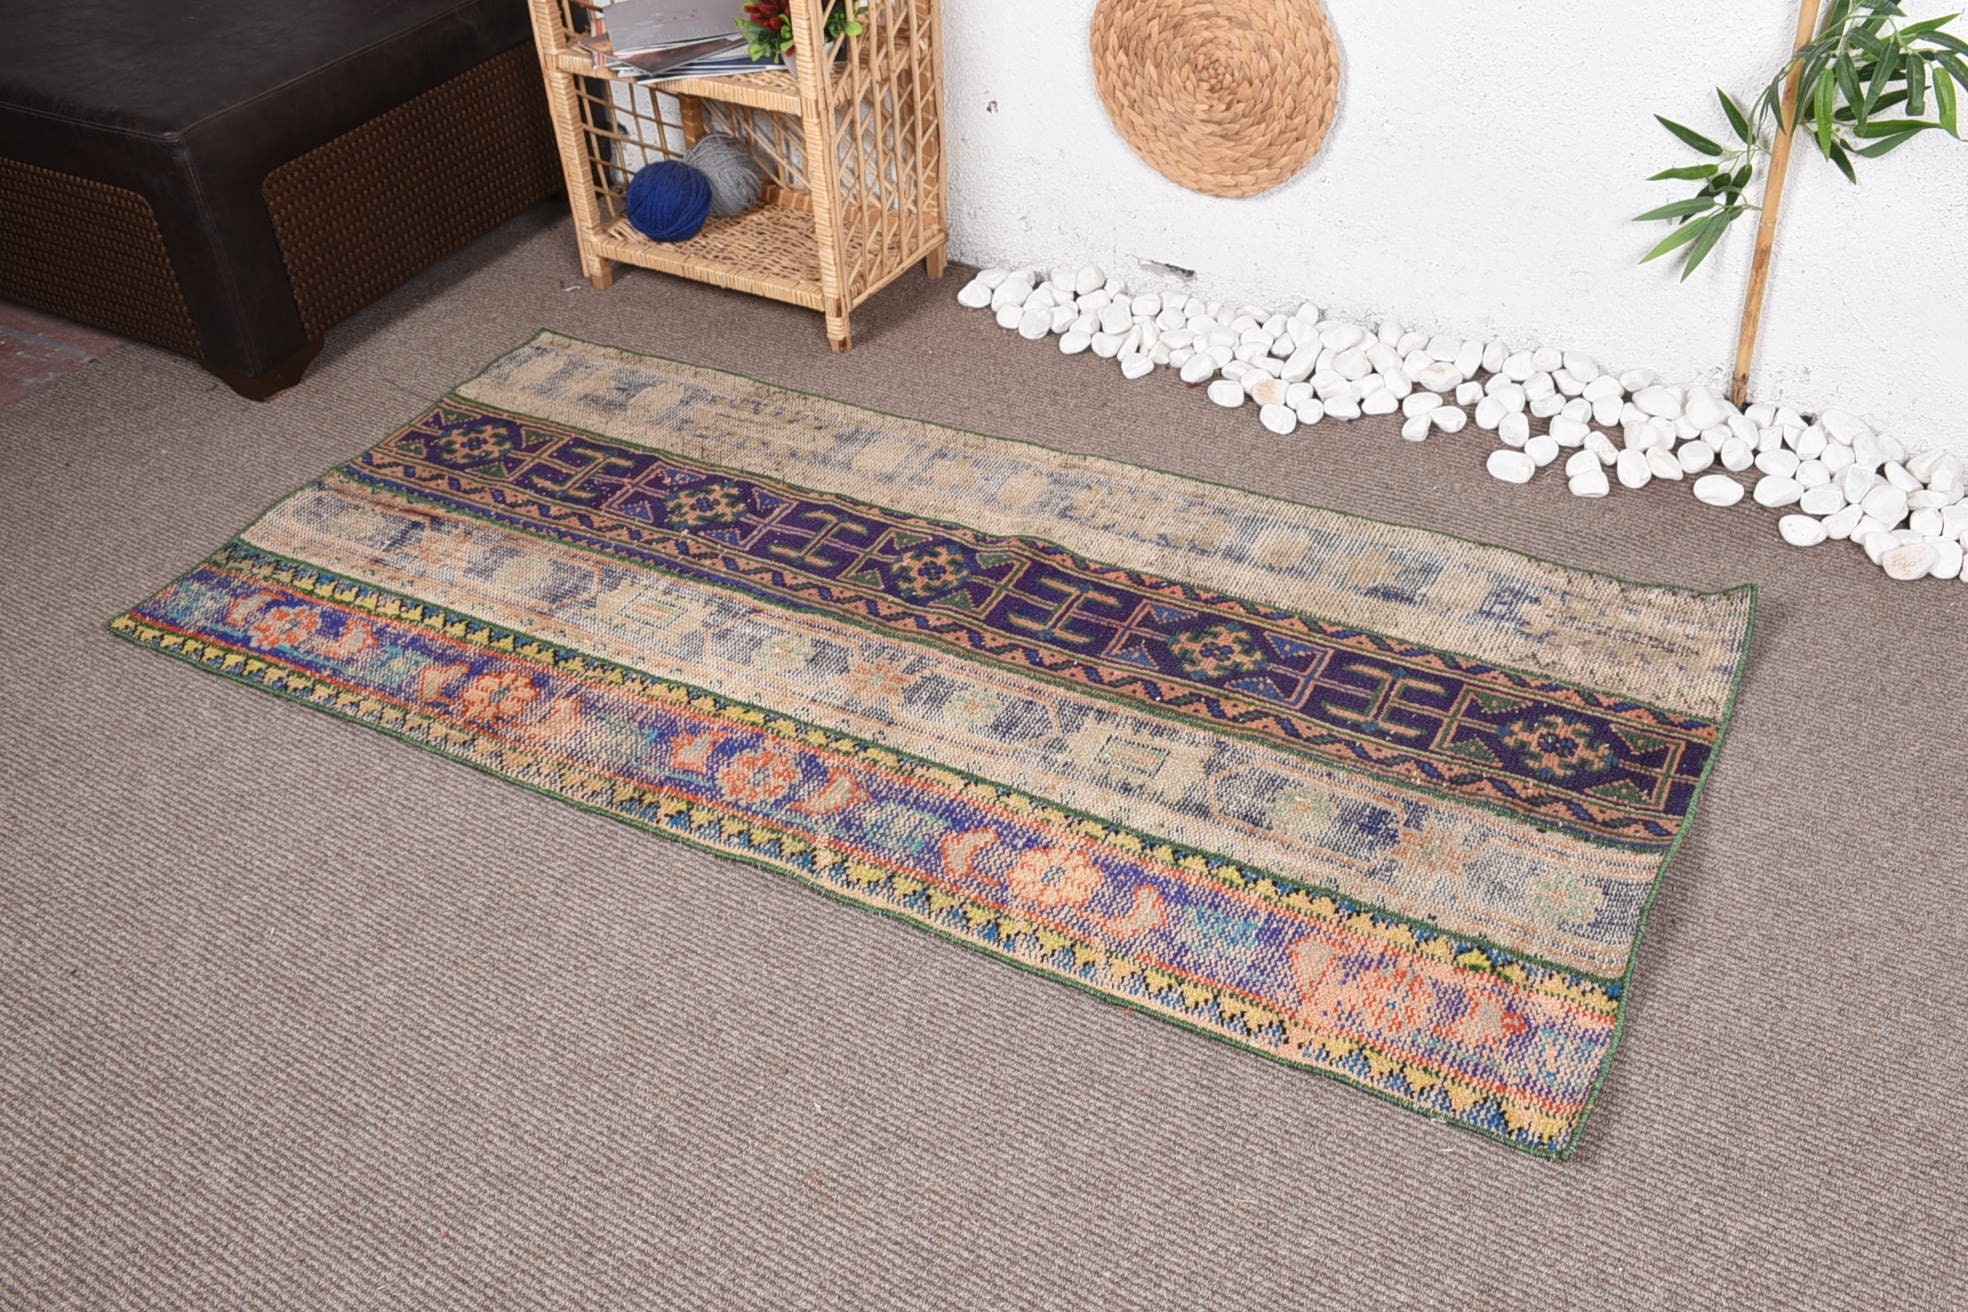 Turkish Rug, Rugs for Entry, Vintage Rug, Decorative Rug, Cute Rugs, Kitchen Rugs, Bedroom Rug, Cool Rug, 2.8x5.8 ft Accent Rugs, Entry Rug